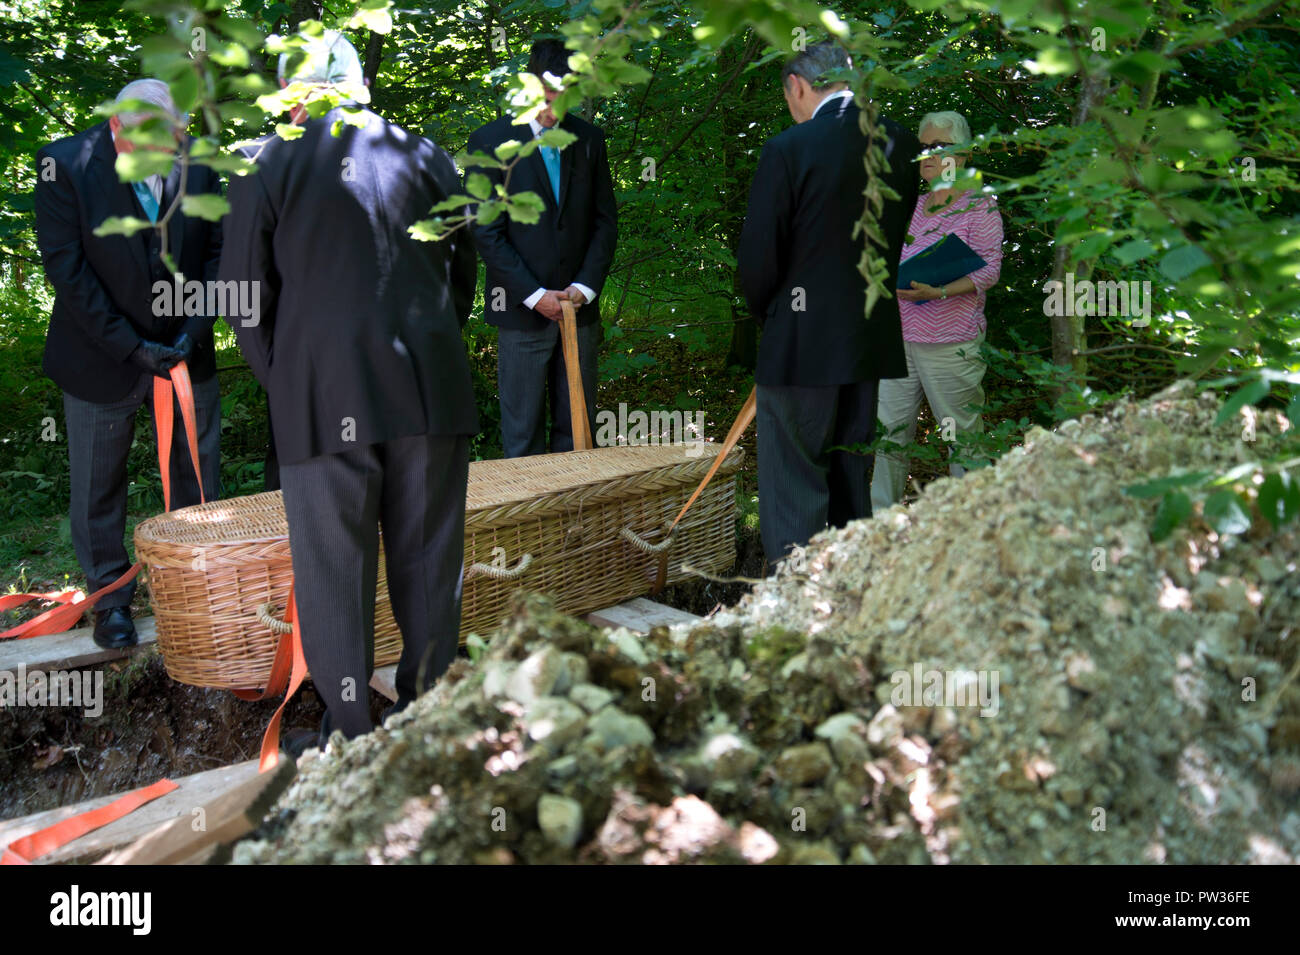 Green  funeral, Sheepgrove organic farm, Lambourn, Berks. Wicker coffin being lowered into the grave Stock Photo